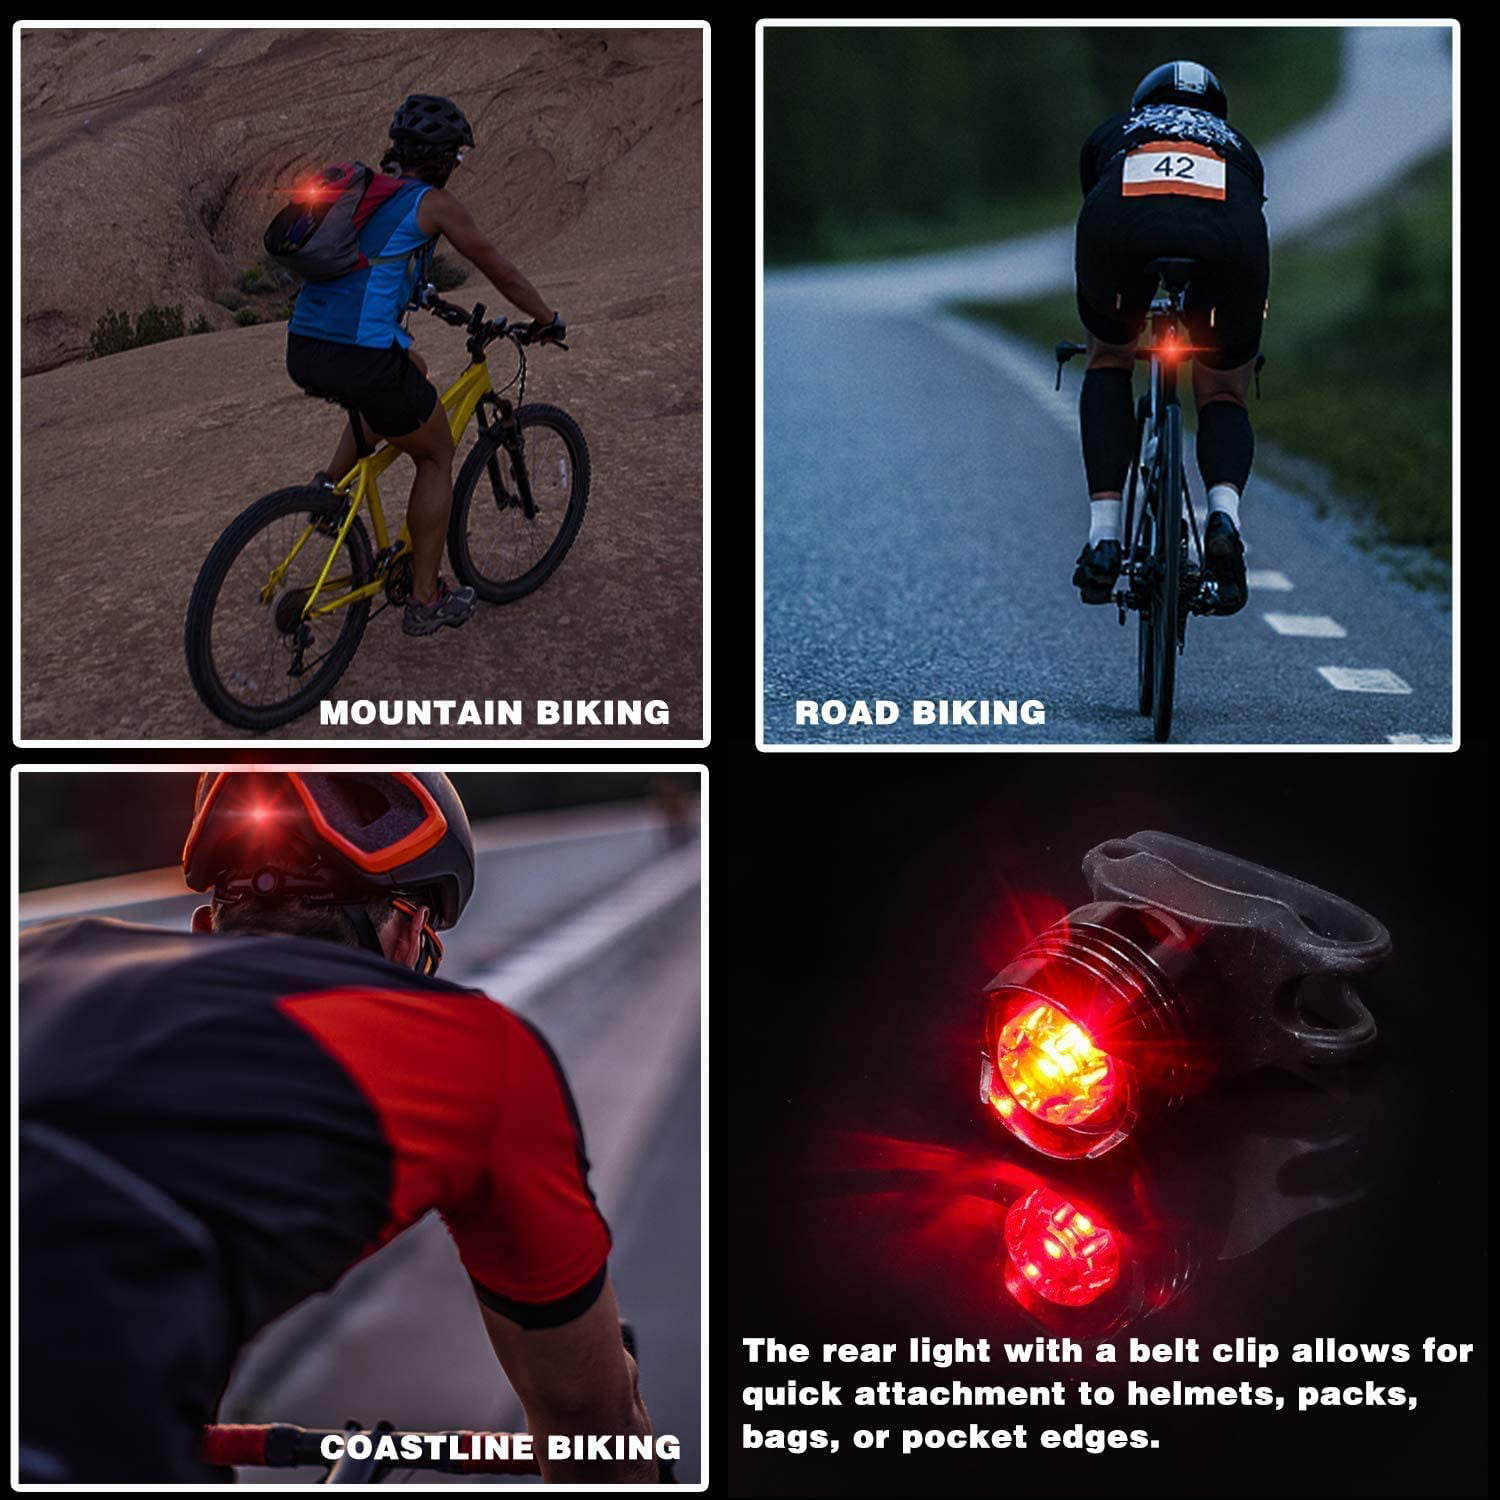 Waterproof Cycling Road Bicycle Light Headlight Front and Back Rear Light for Night Riding BenRich Mountain Bike Lights Set 2400 Lumens Cree XML-T6 LED USB Rechargeable